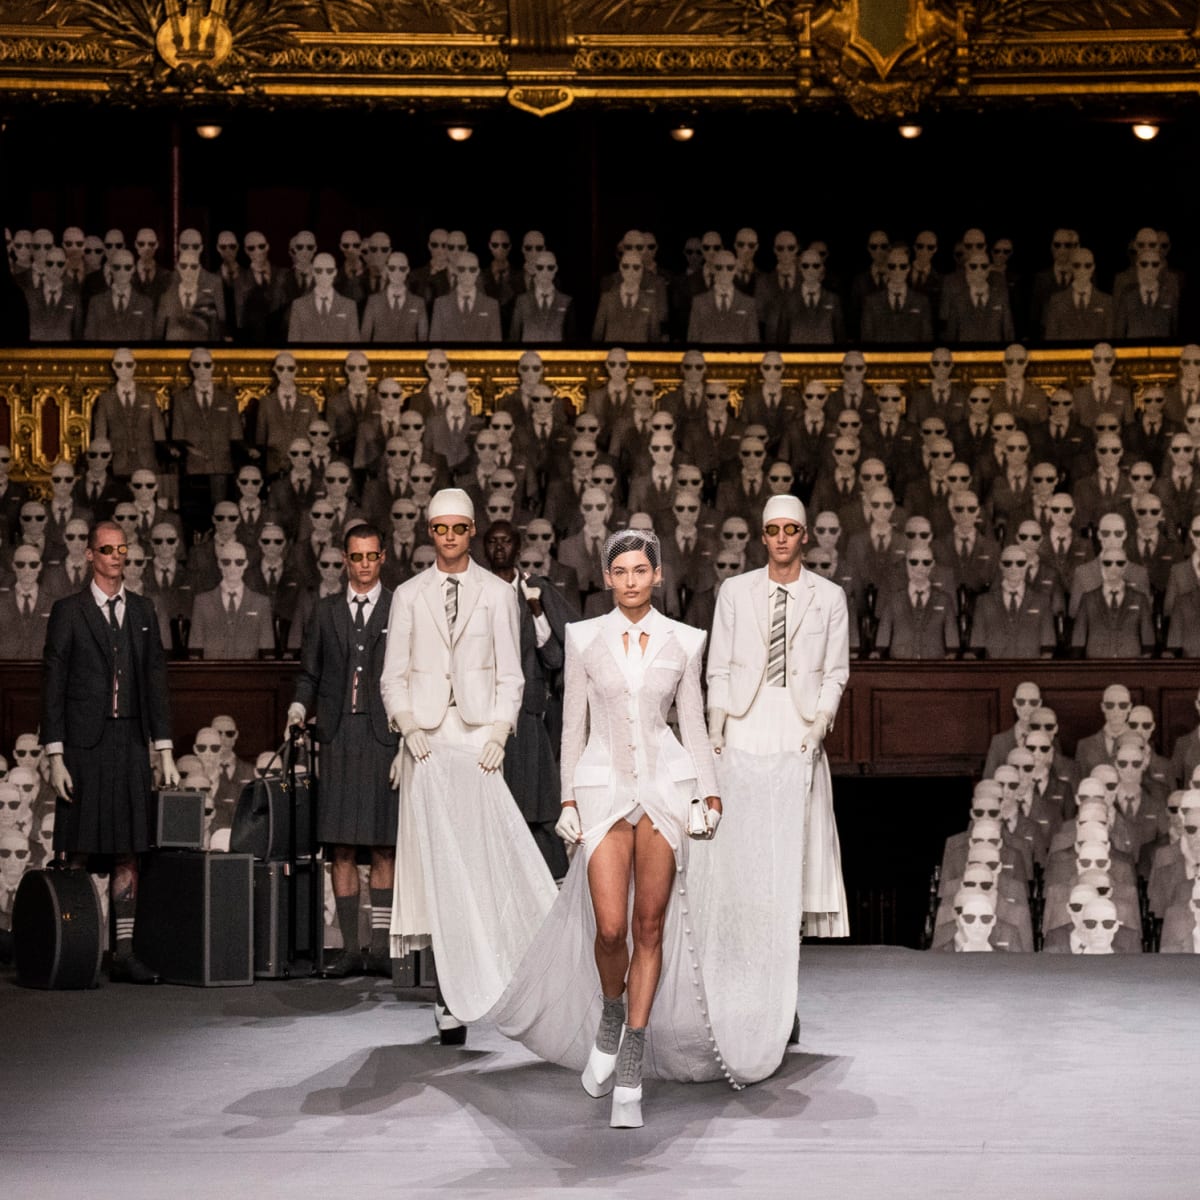 The best wedding dress inspiration from Haute Couture Fashion Week